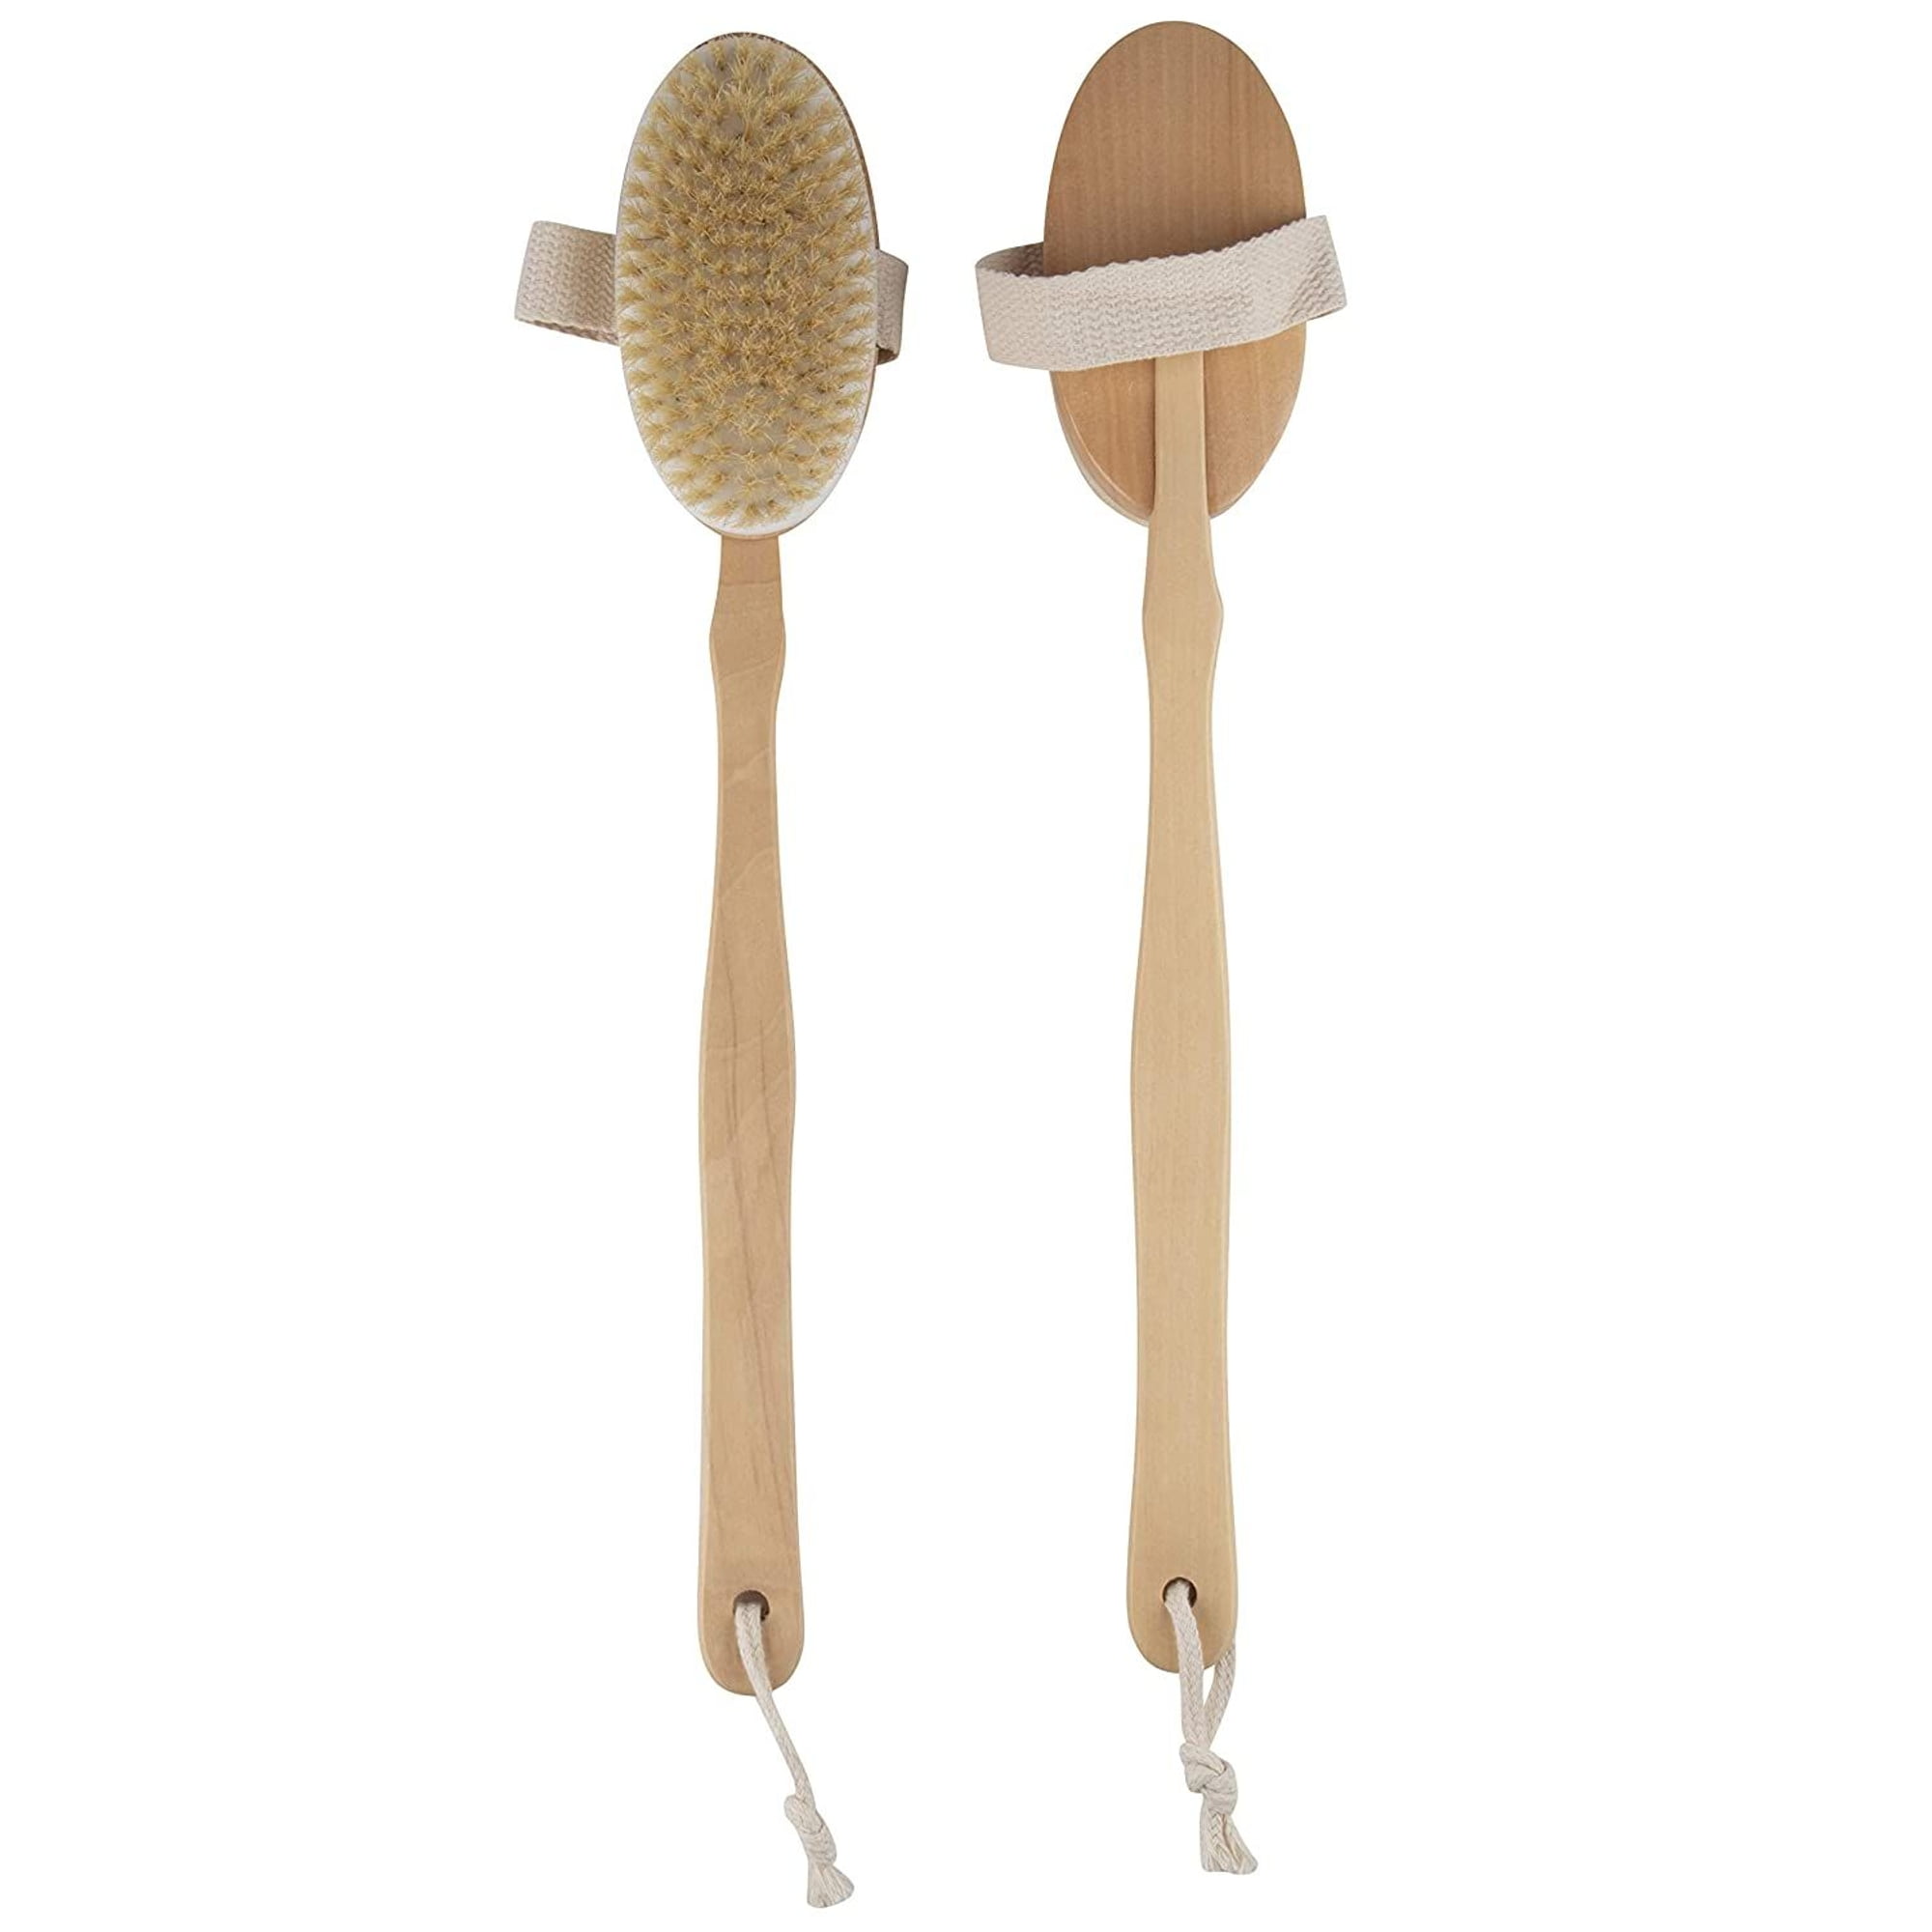 Bath Brush 18 Extra Long Handle: Exfoliating Brush, Natural Bristle Shower Brush by Rengora. Excellent for Skin Cleansing, Dry Brushing, Back SCR